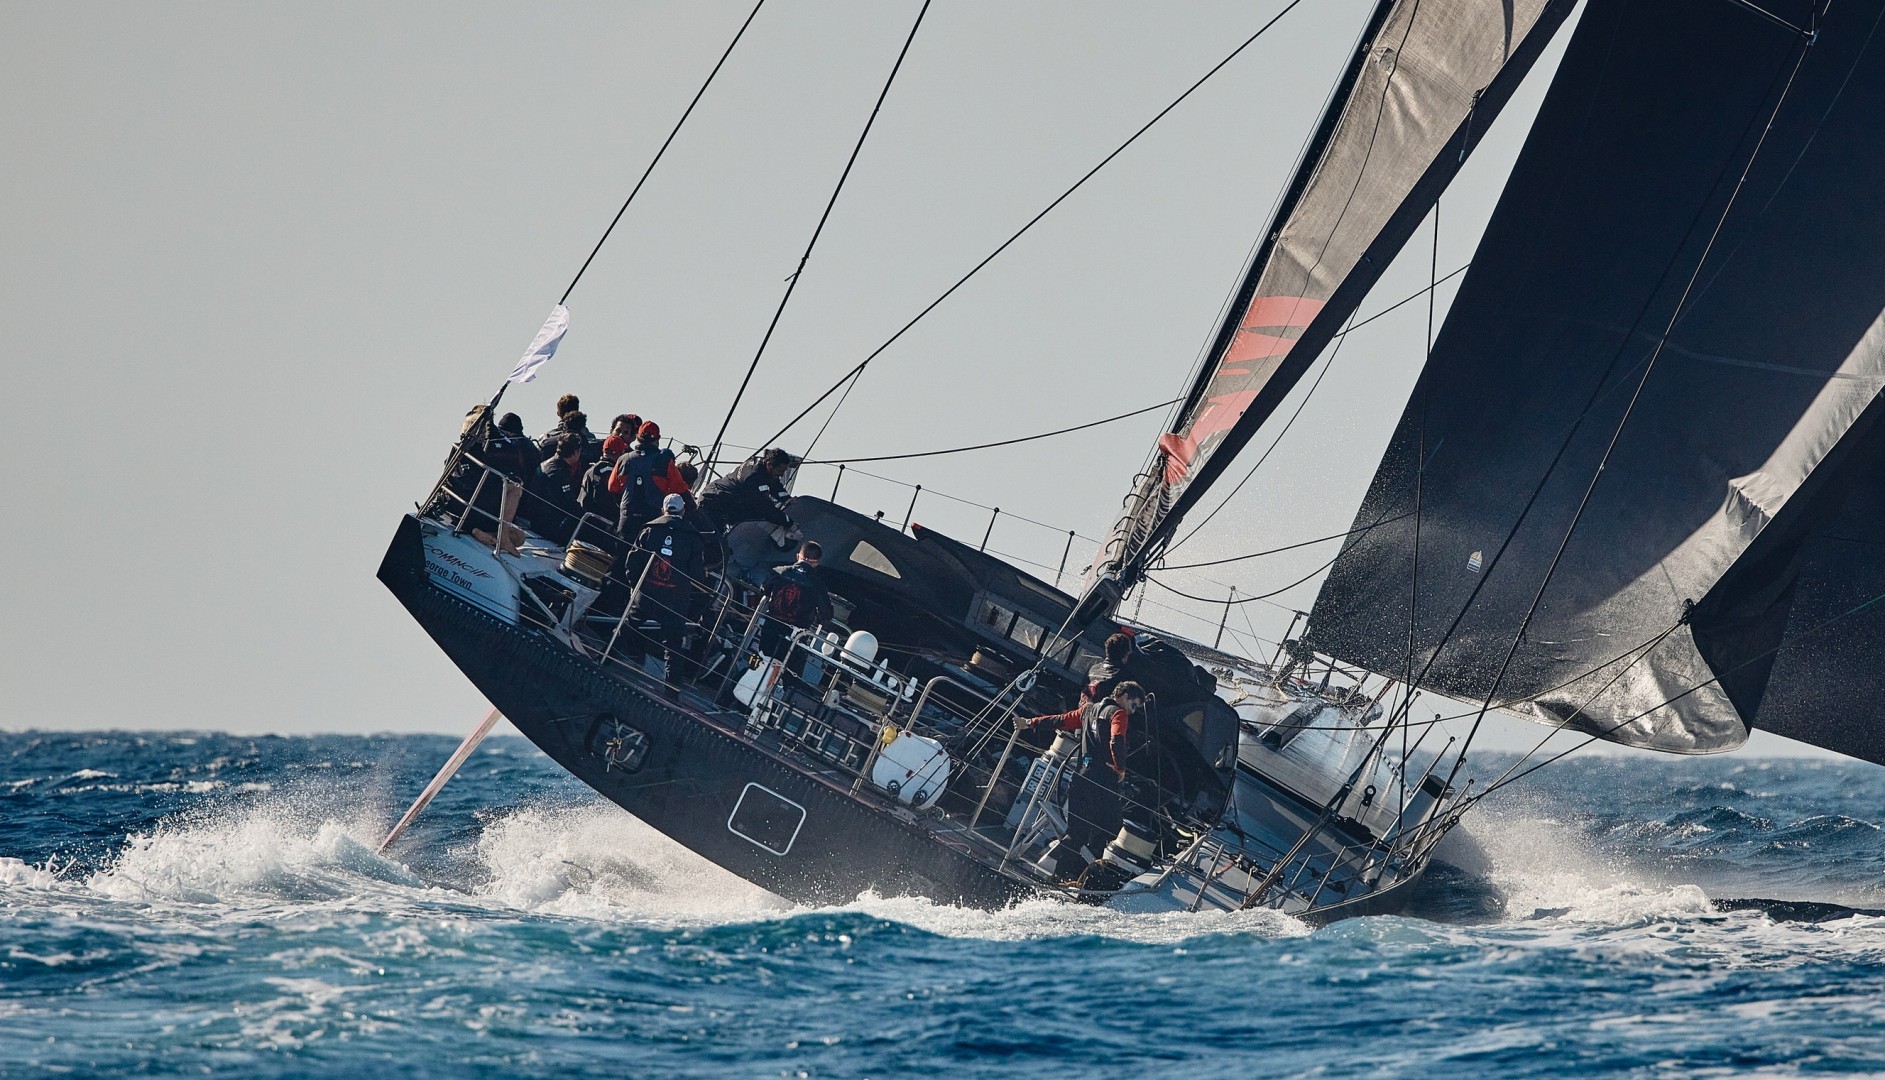 Following her 'triple' in the RORC-IMA Transatlantic Race, can Comanche repeat this in the RORC Caribbean 600? Photo: James Mitchell/RORC